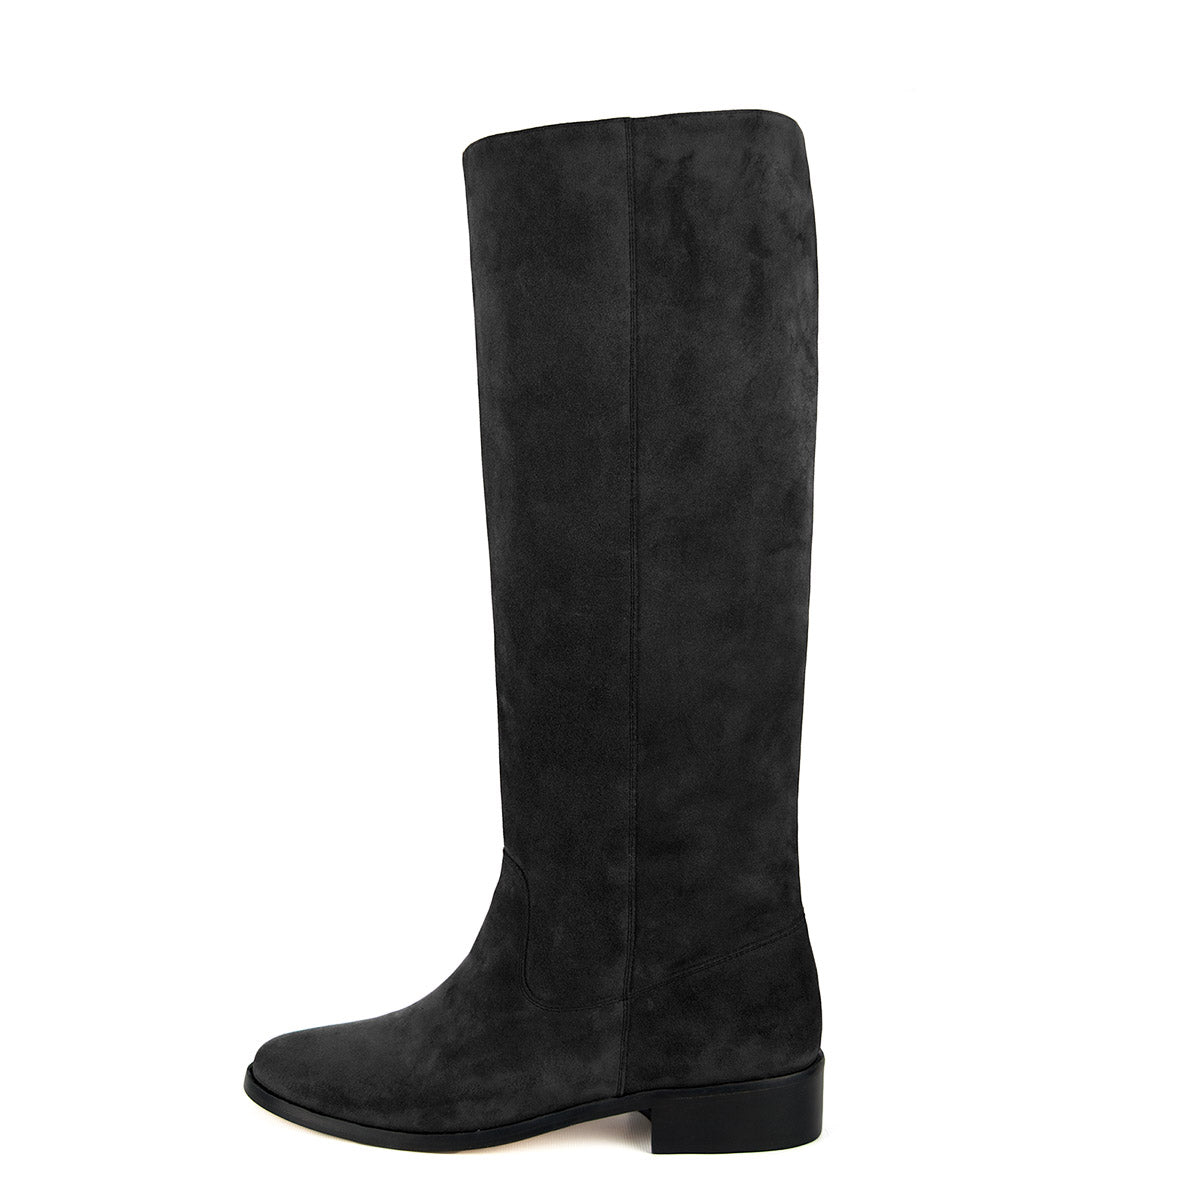 black suede boots wide fit